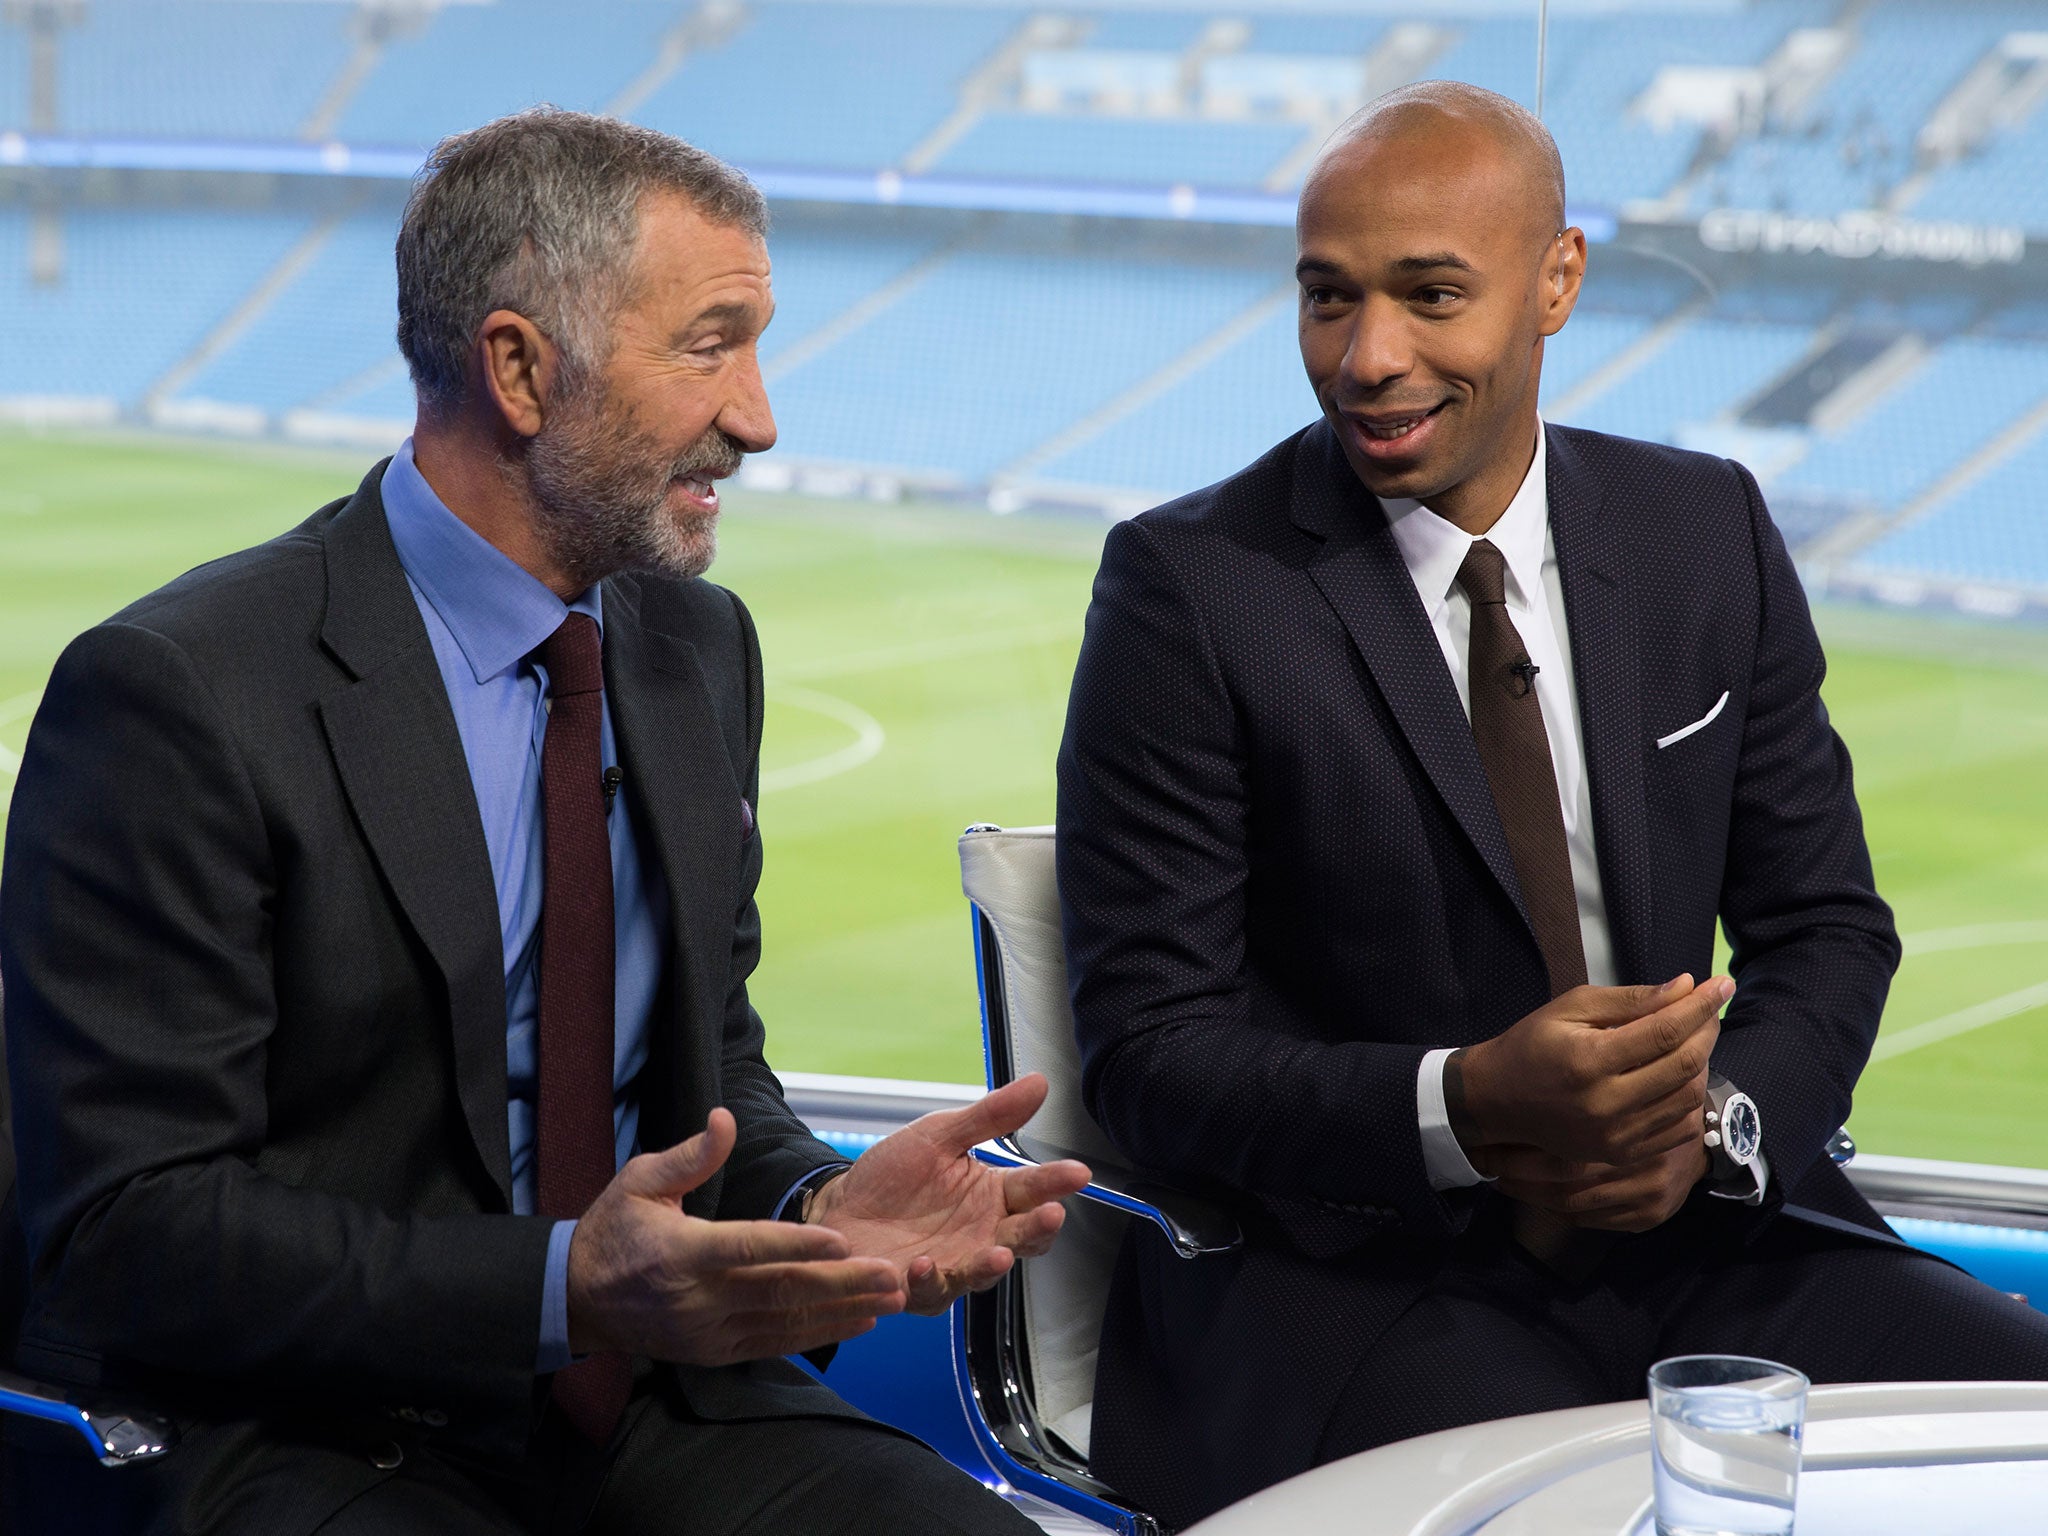 Thierry Henry (right) speaks with Graeme Souness